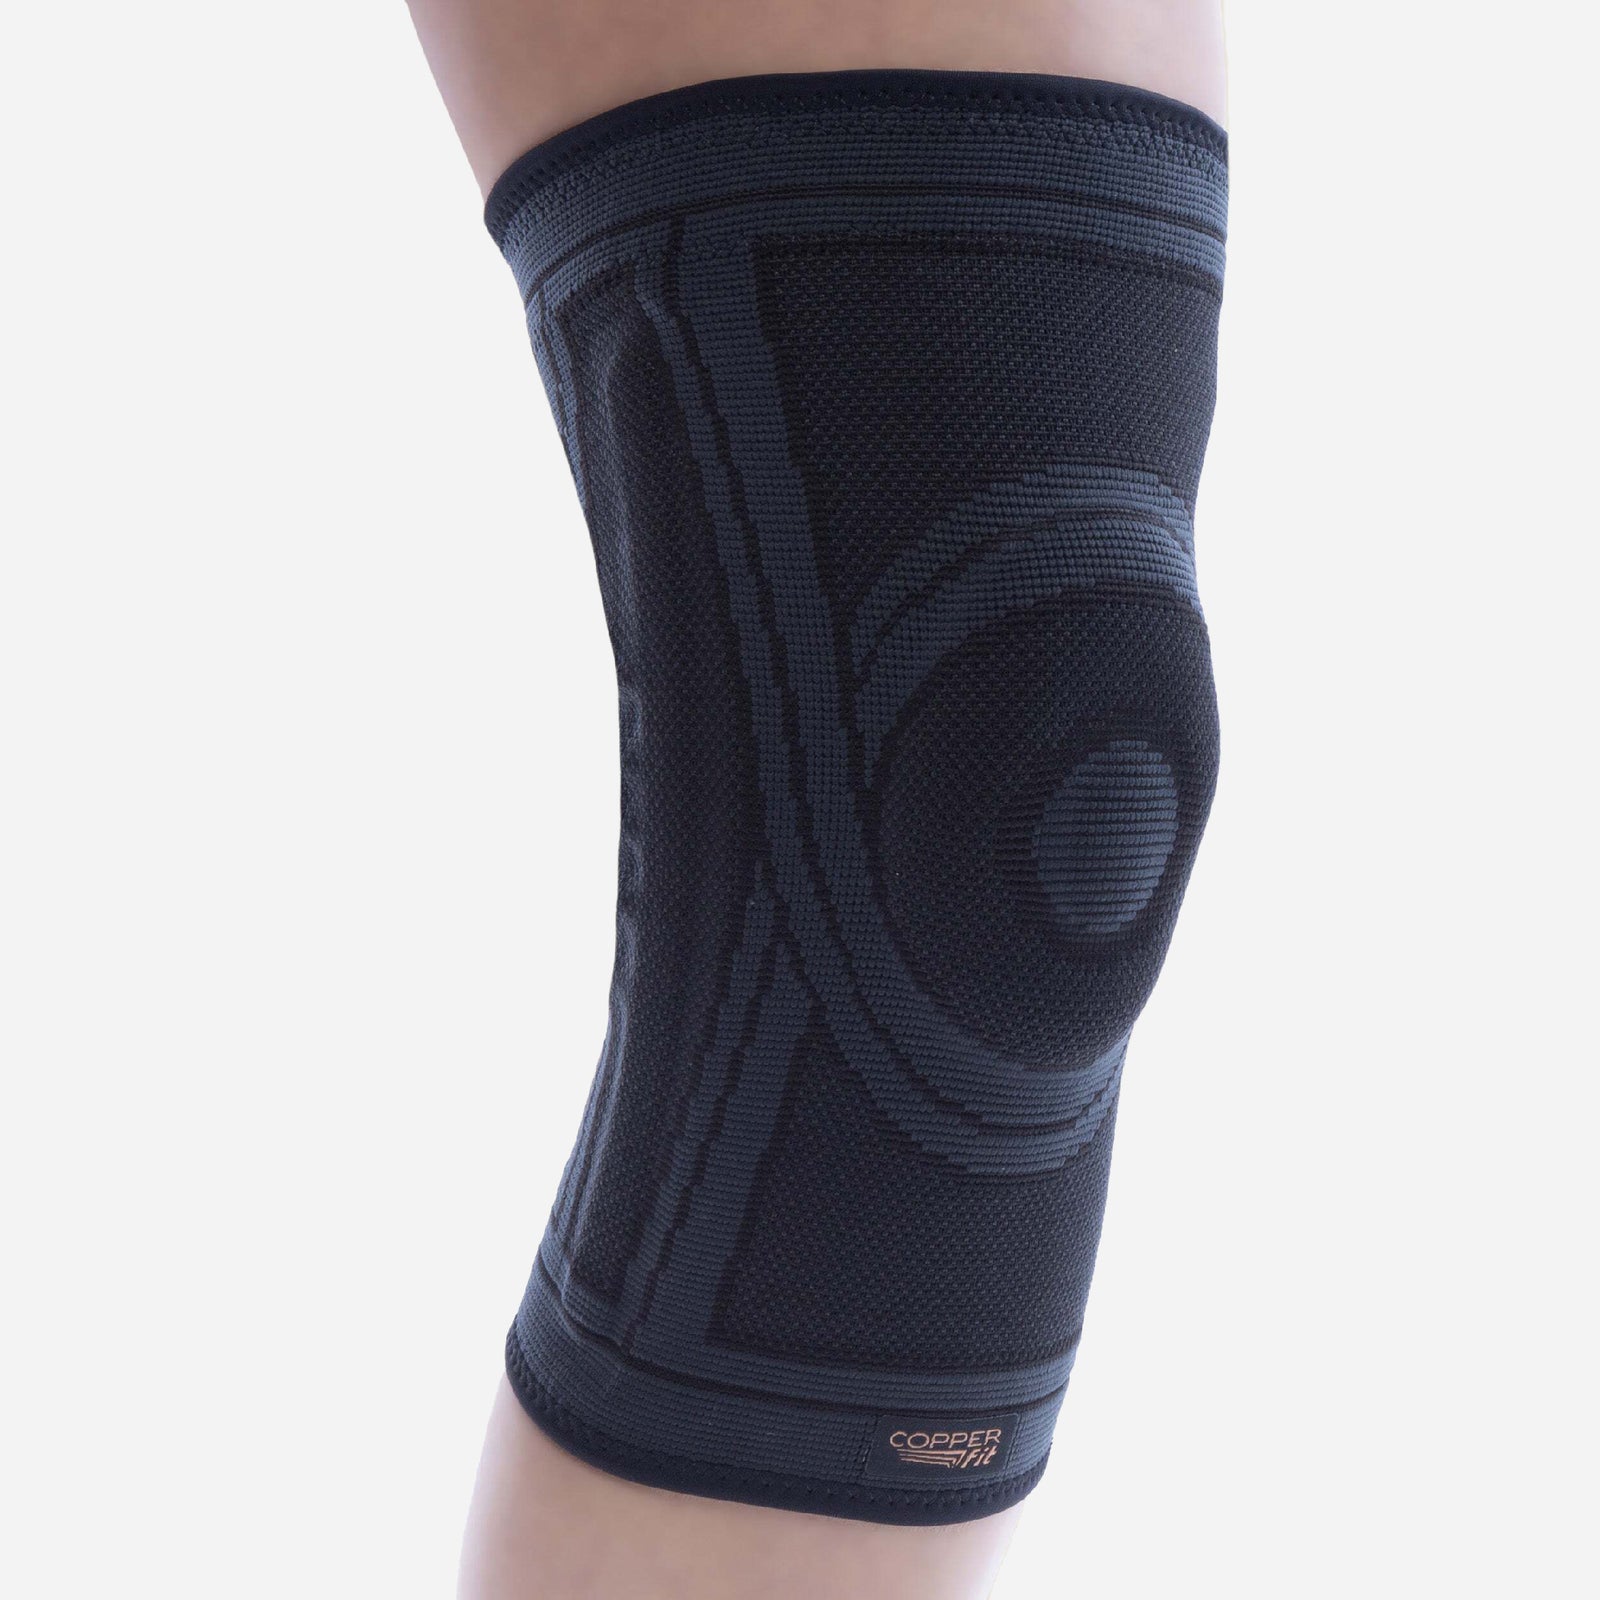 Copper Fit Freedom Large Black Knee Sleeve - Power Townsend Company